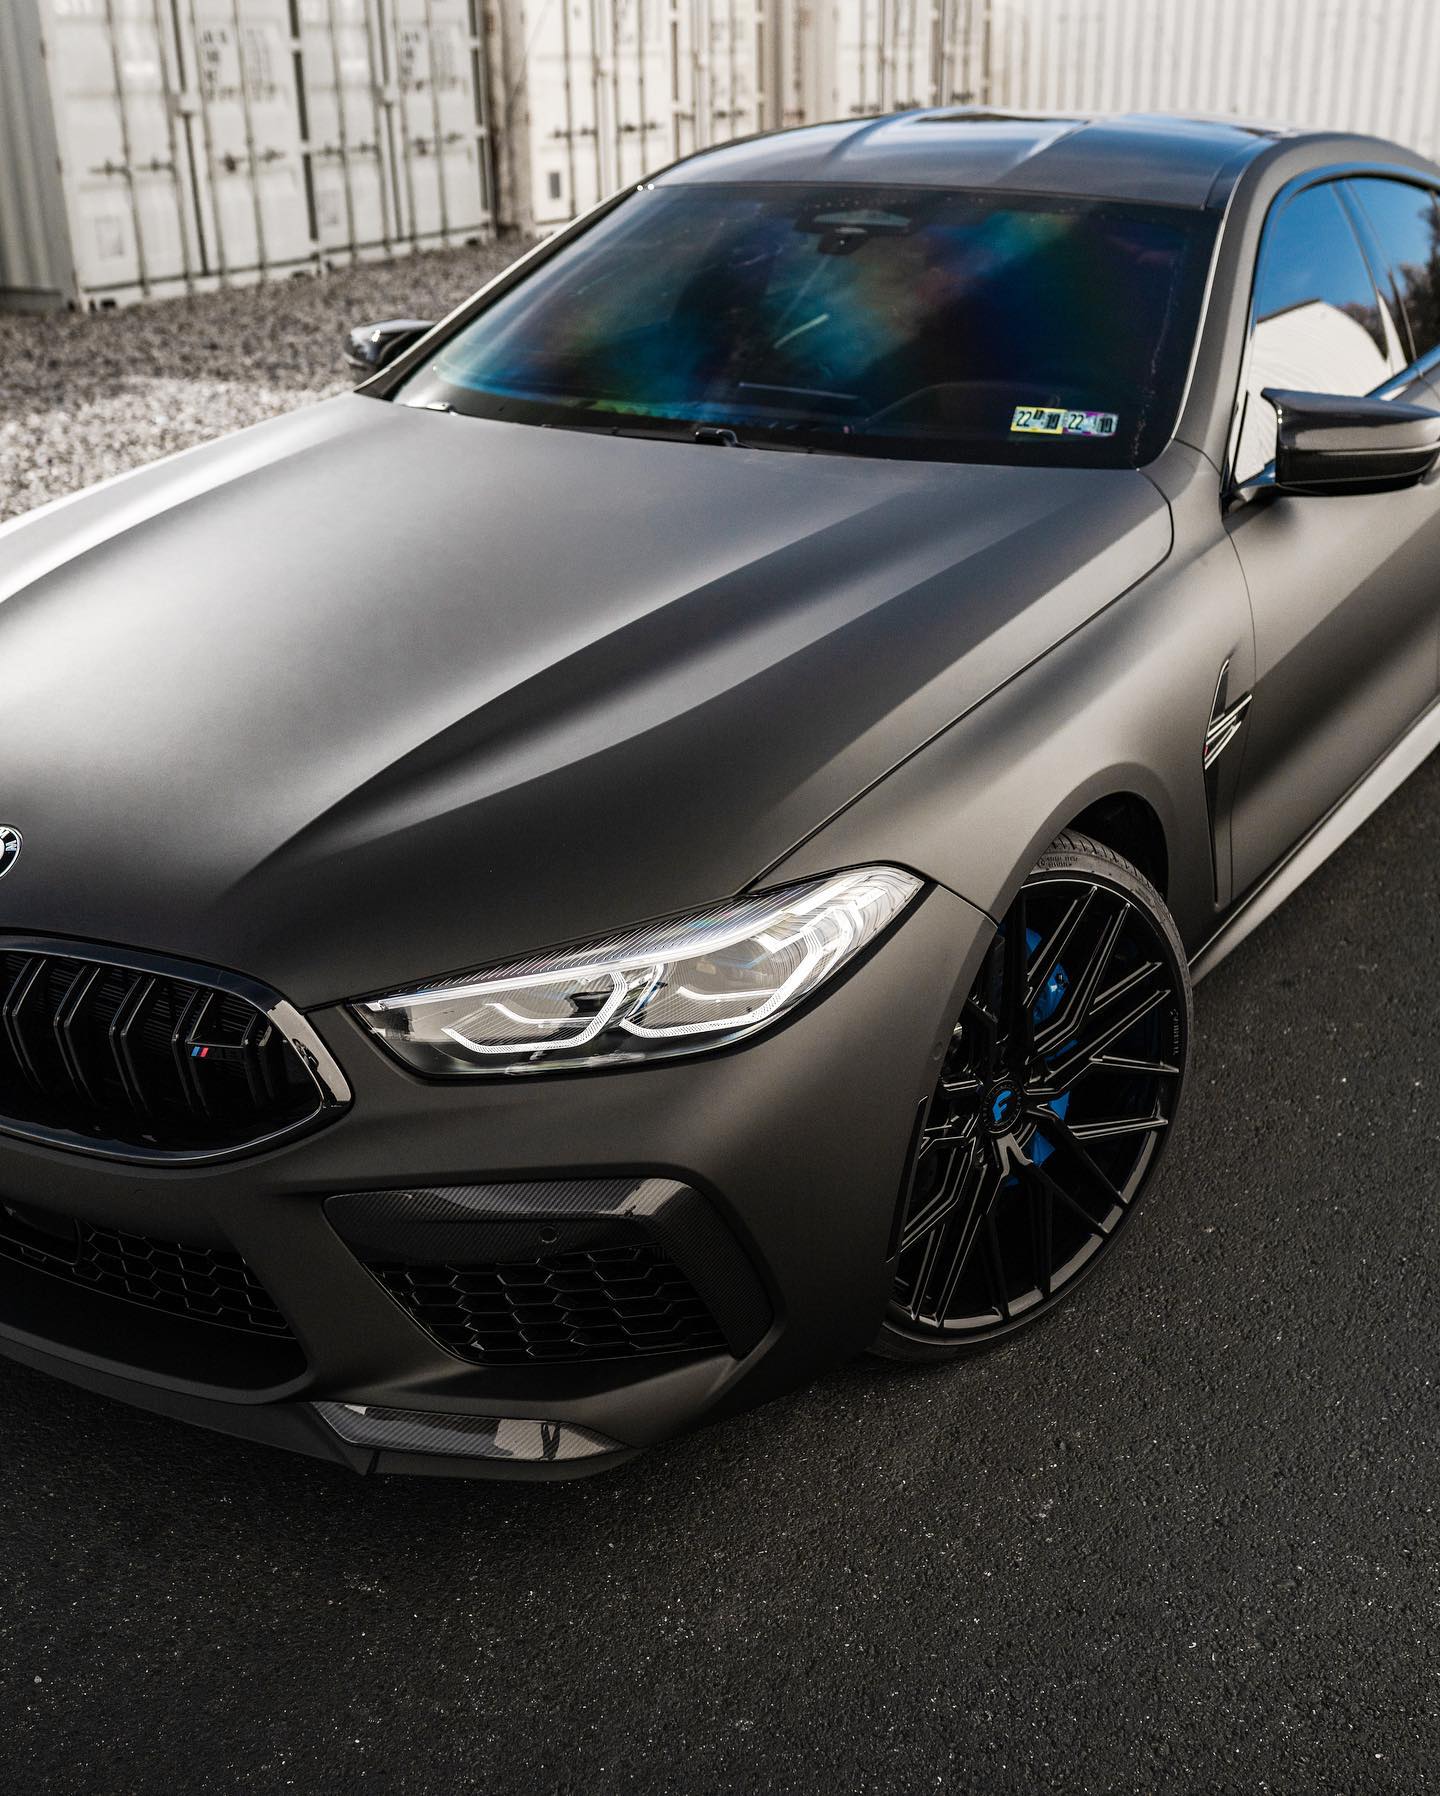 Matte Black 2022 Bmw M8 Competition Gran Coupe Rides Dead On Matching Forgiatos 2 